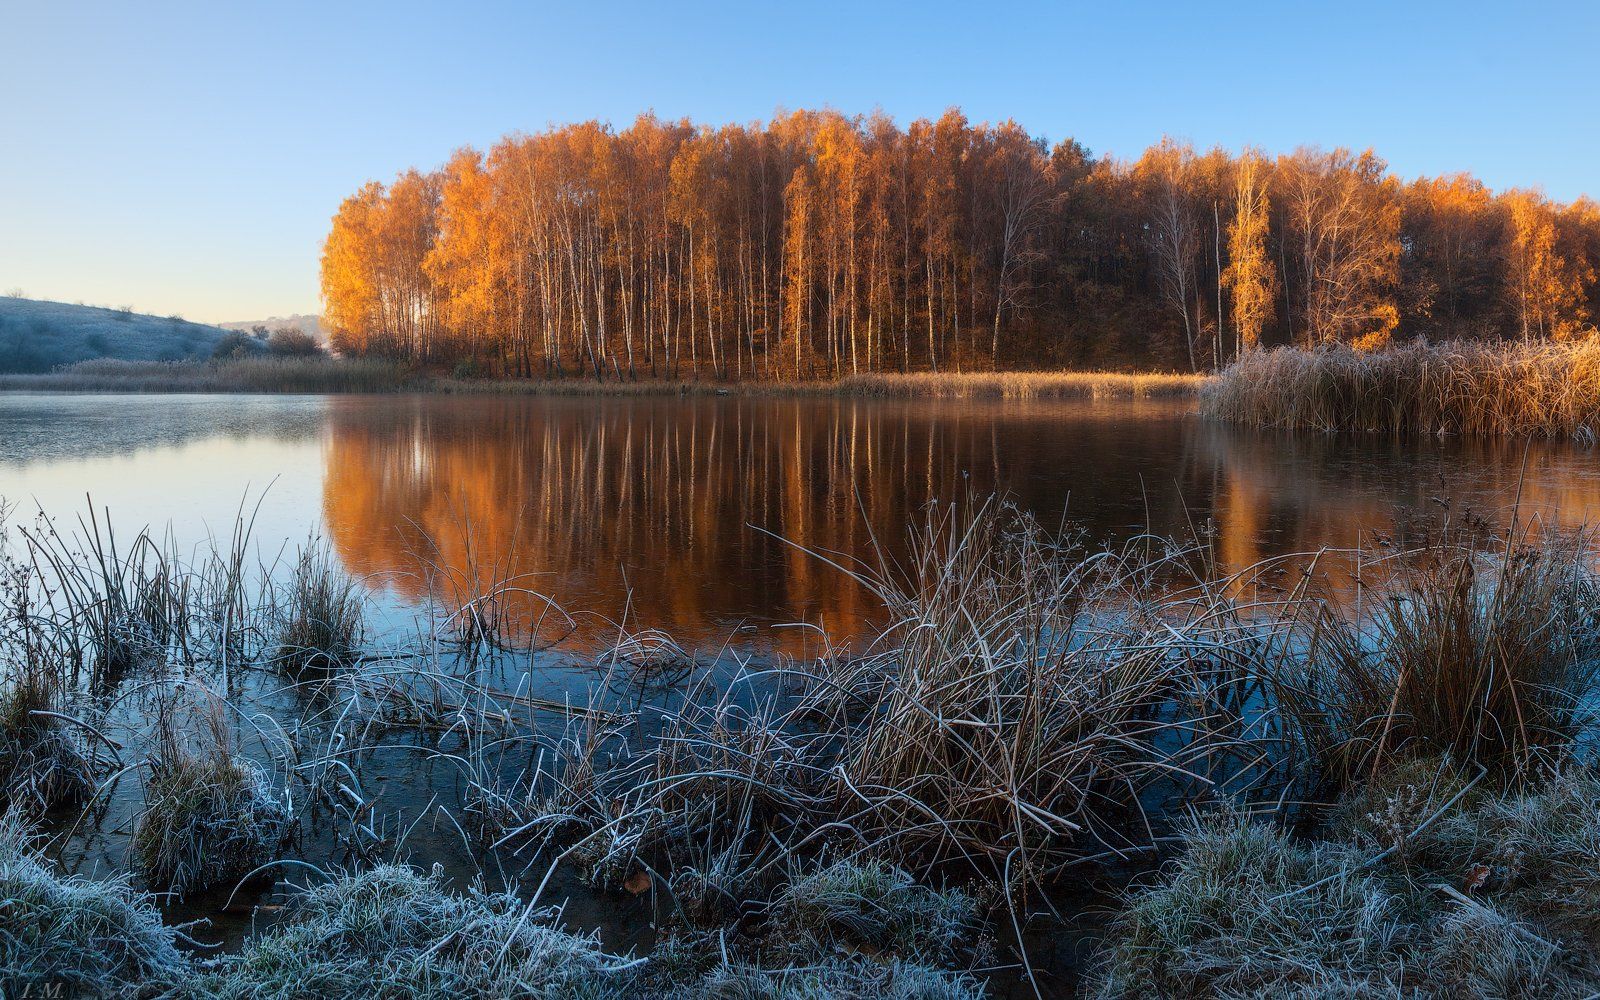 autumn, trees, landscape, sunrise, morning, lake, frozen, reflections, water, nature, light, grass, colors, panorama, pond, countryside, frost, outdoors, first, wide angle, осень, рассвет, заморозки, березки, деревья, панорама, I'M